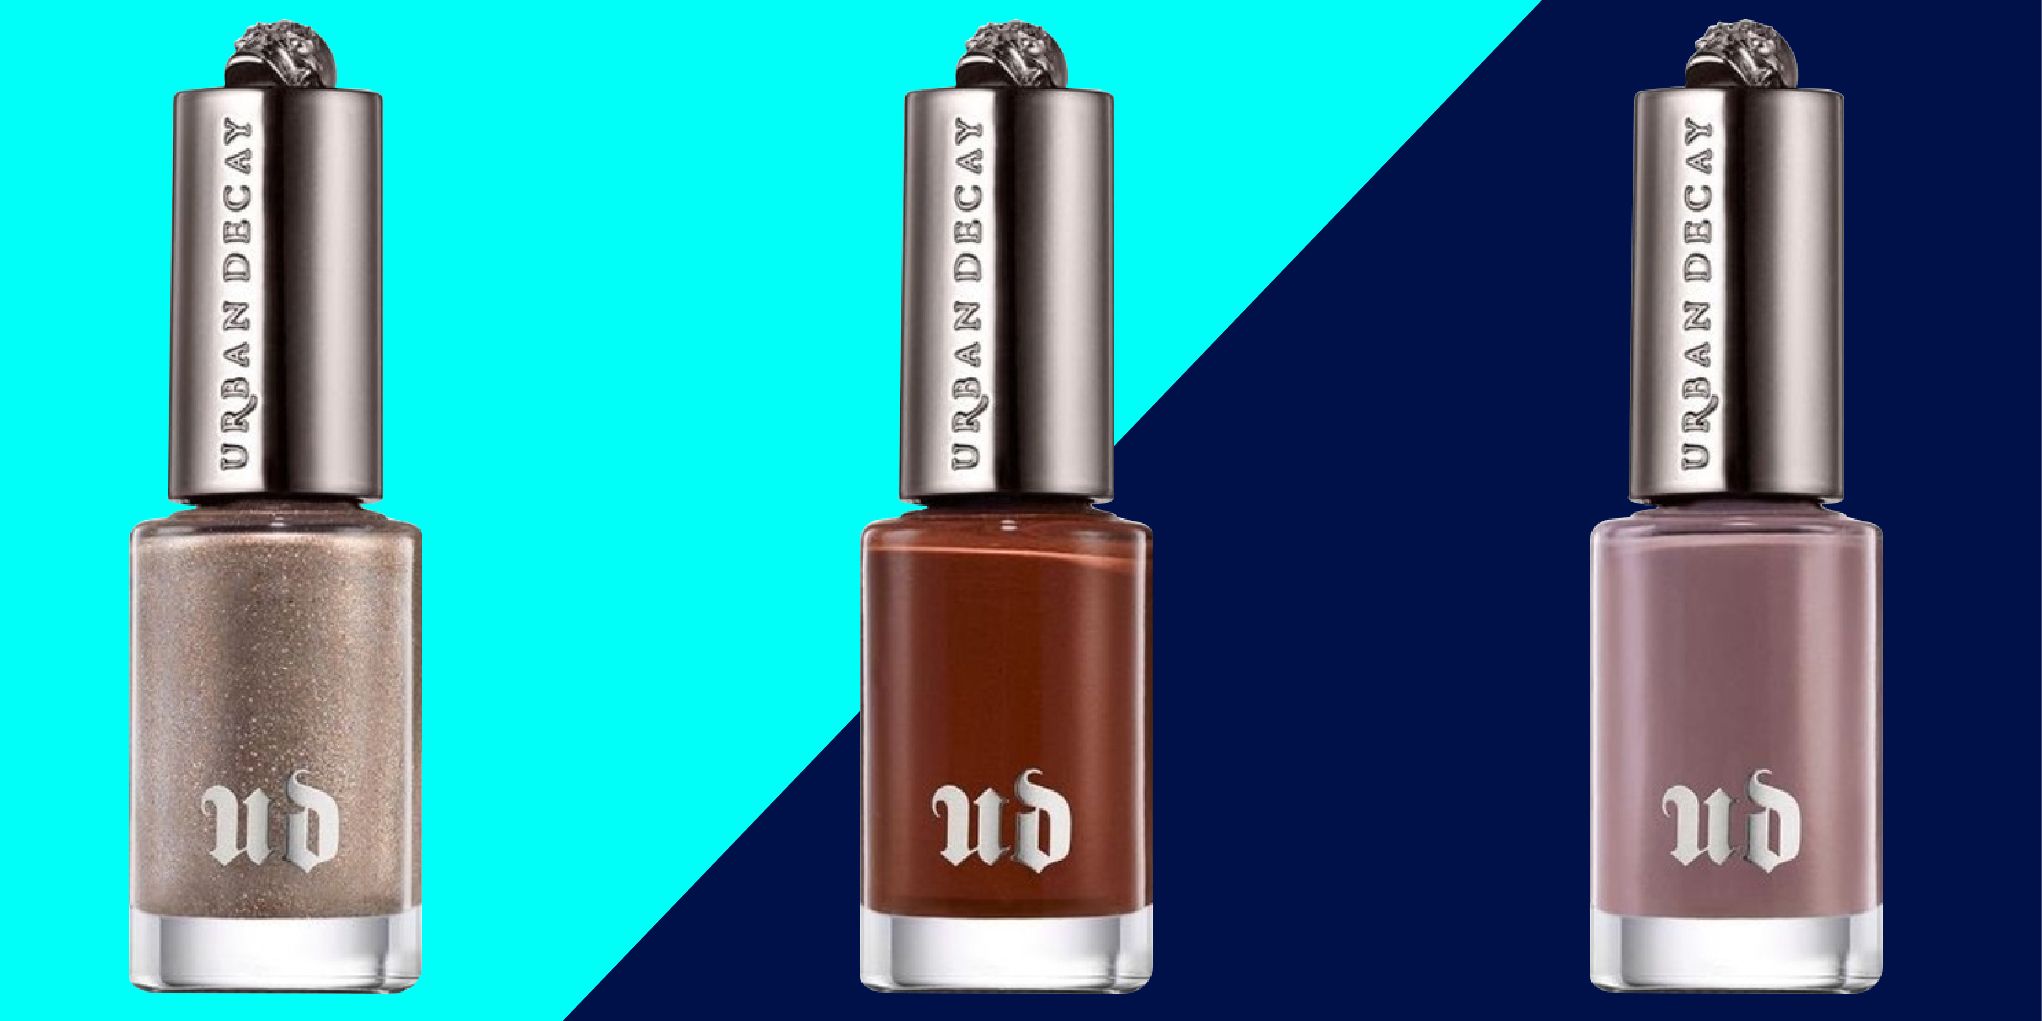 Buy Urban Color Nail Lacquer, 9ml Online at Low Prices in India - Amazon.in